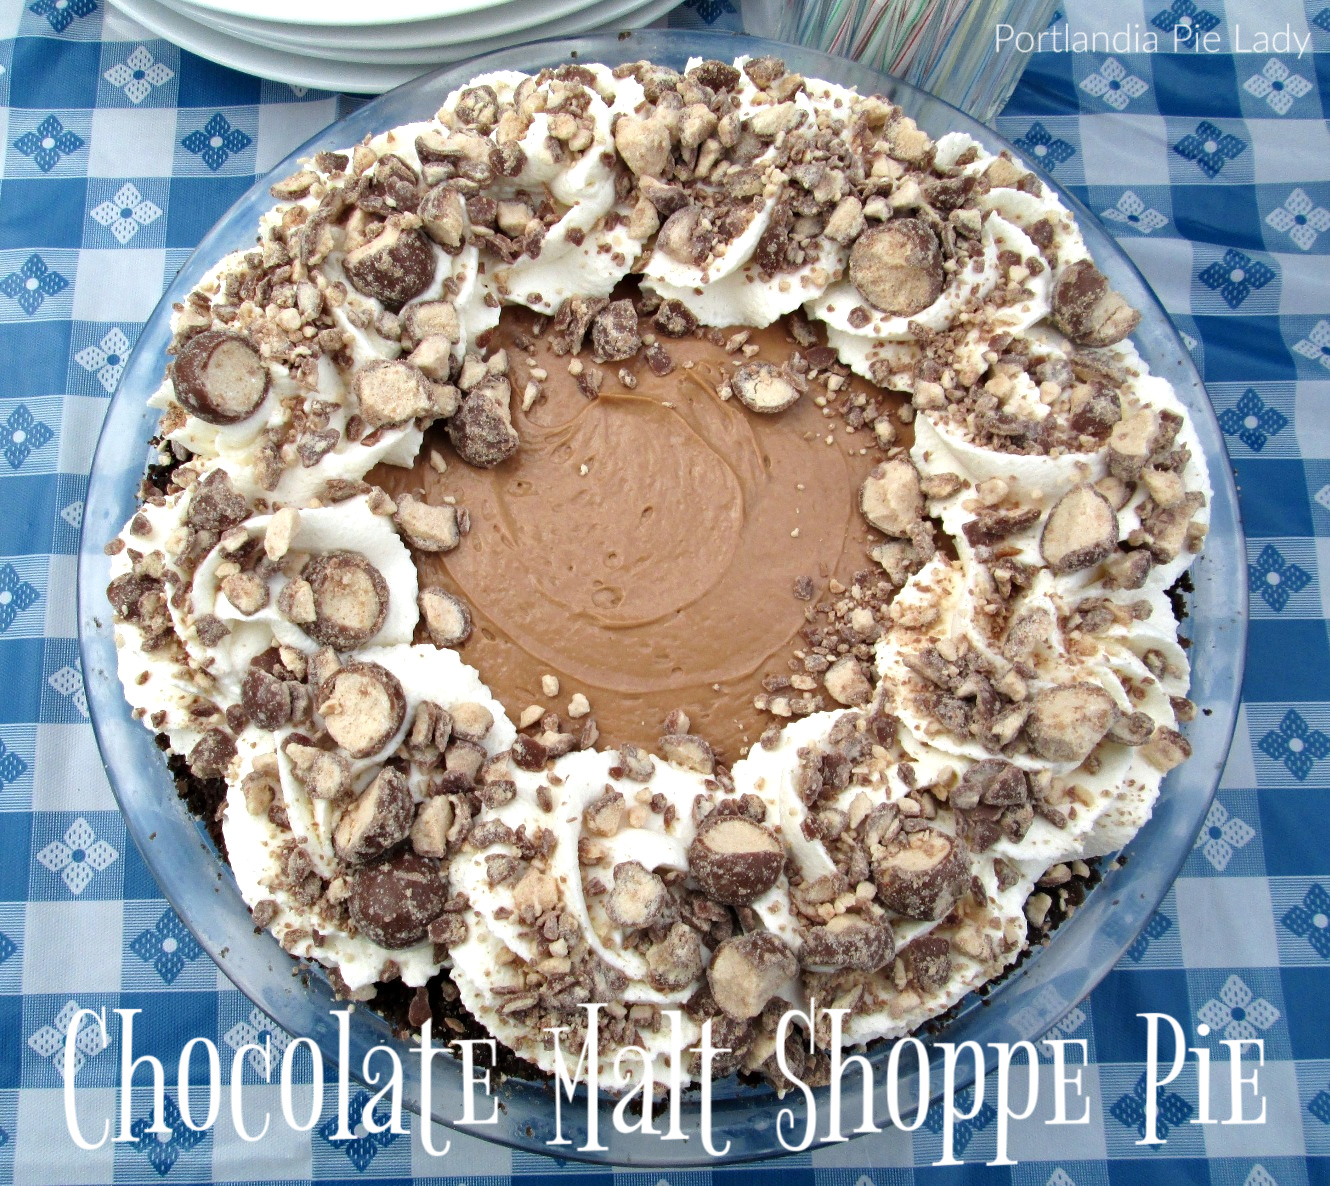 Chocolate malt-a-licious smooth & creamy pie is packed full of crushed Whoppers; tastes like an old time ice cream shoppe opened in your kitchen!